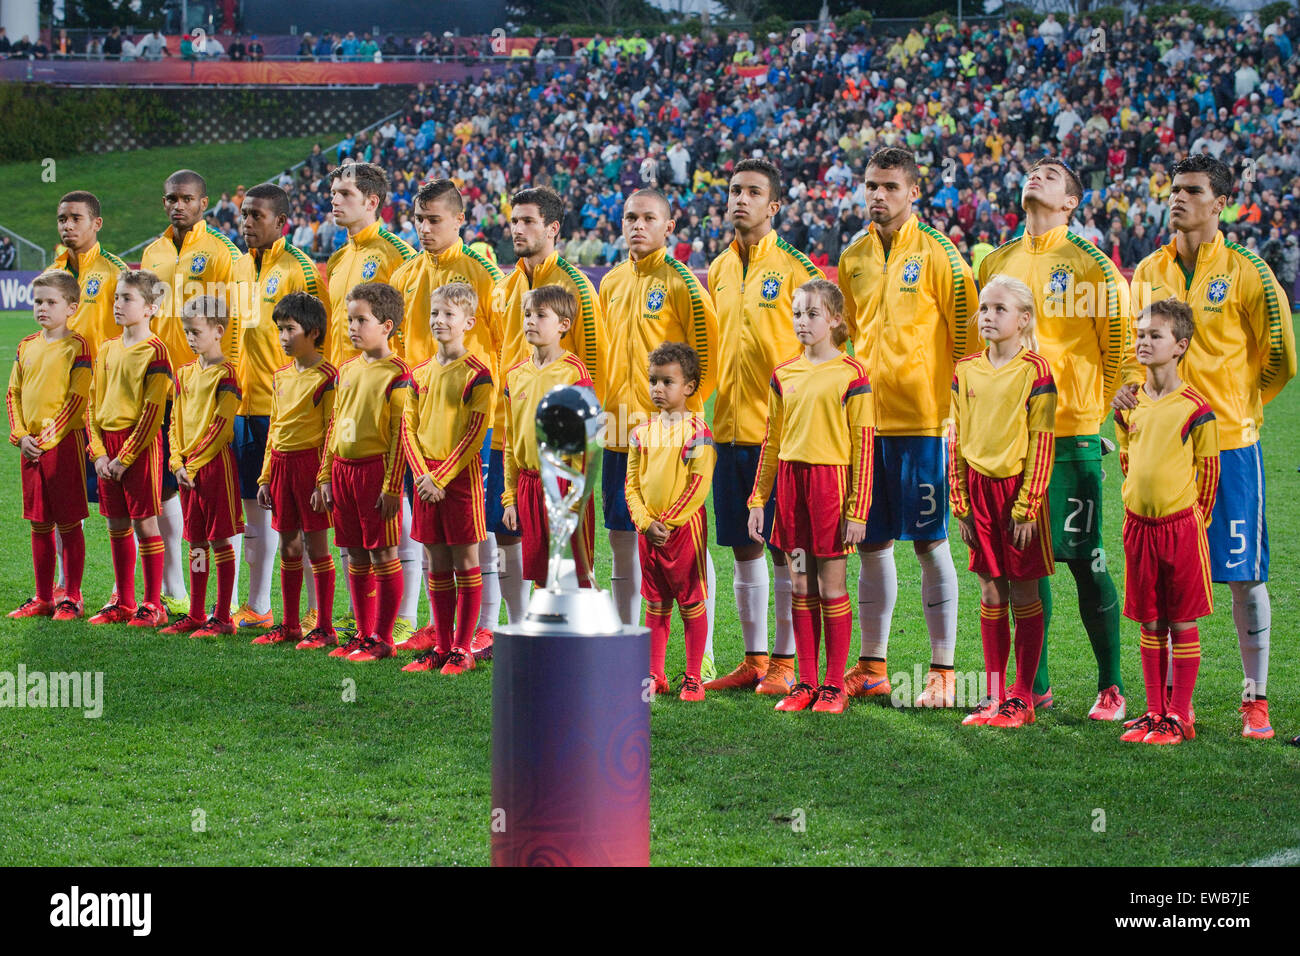 Auckland, New Zealand, Feature. 20th June, 2015. Auckland, New Zealand - June 20, 2015 - The FIFA U20 World Cup Trophy is displayed with Team Brazil in the background ahead of the FIFA U20 World Cup final match between Brazil and Serbia at North Harbour Stadium on June 20, 2015 in Auckland, New Zealand, Feature. Credit:  dpa/Alamy Live News Stock Photo